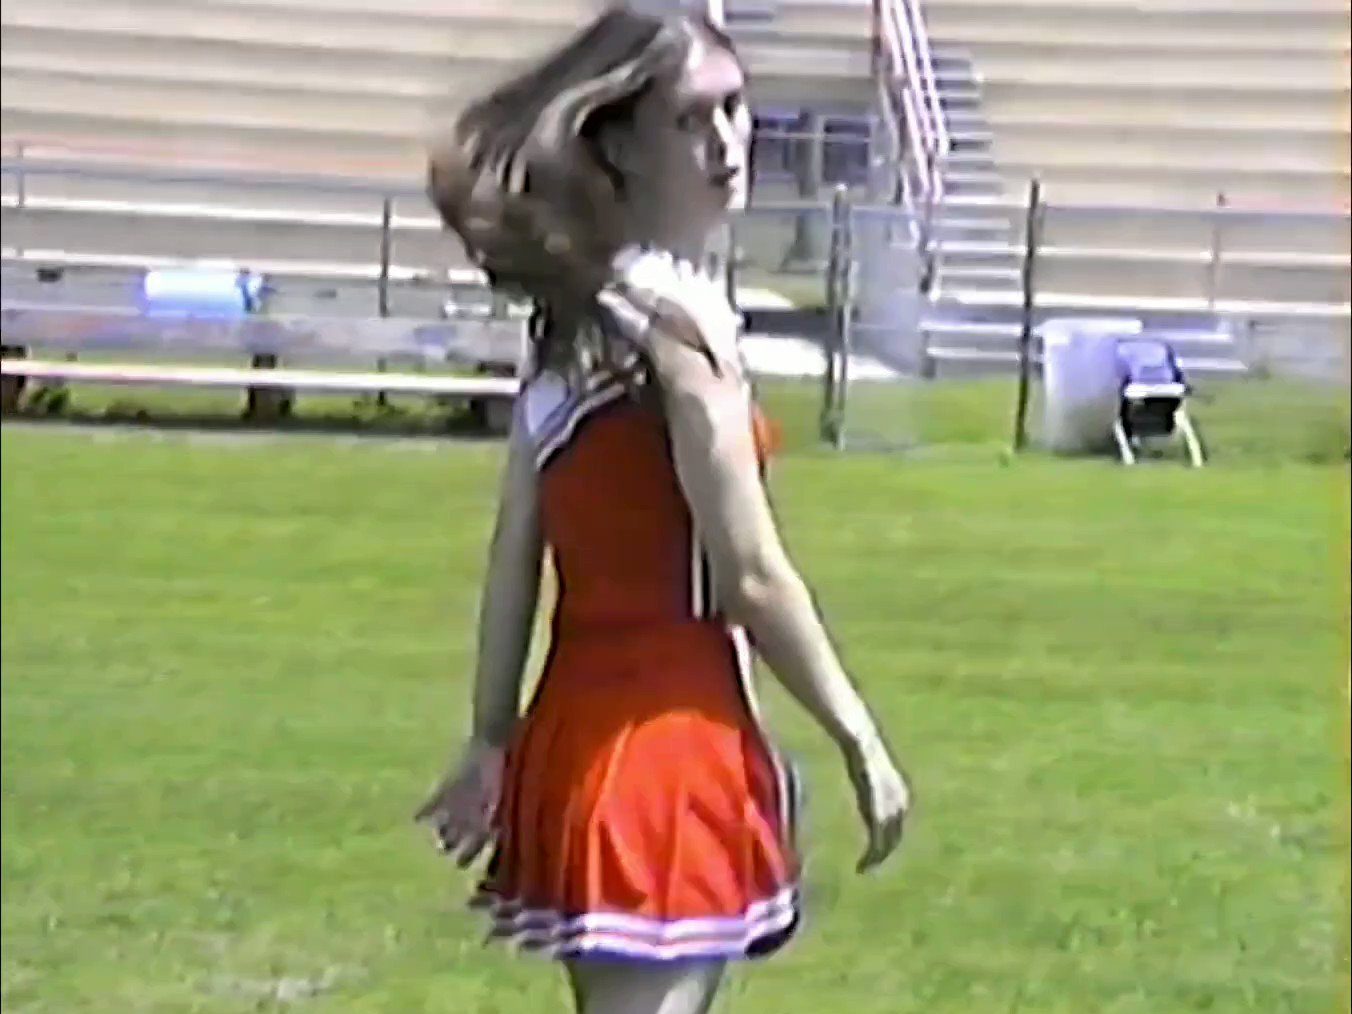 In an article about the singer-songwriter Ethel Cain, a frame from her music video "American Teenager" featuring the singer in a cheerleading outfit.